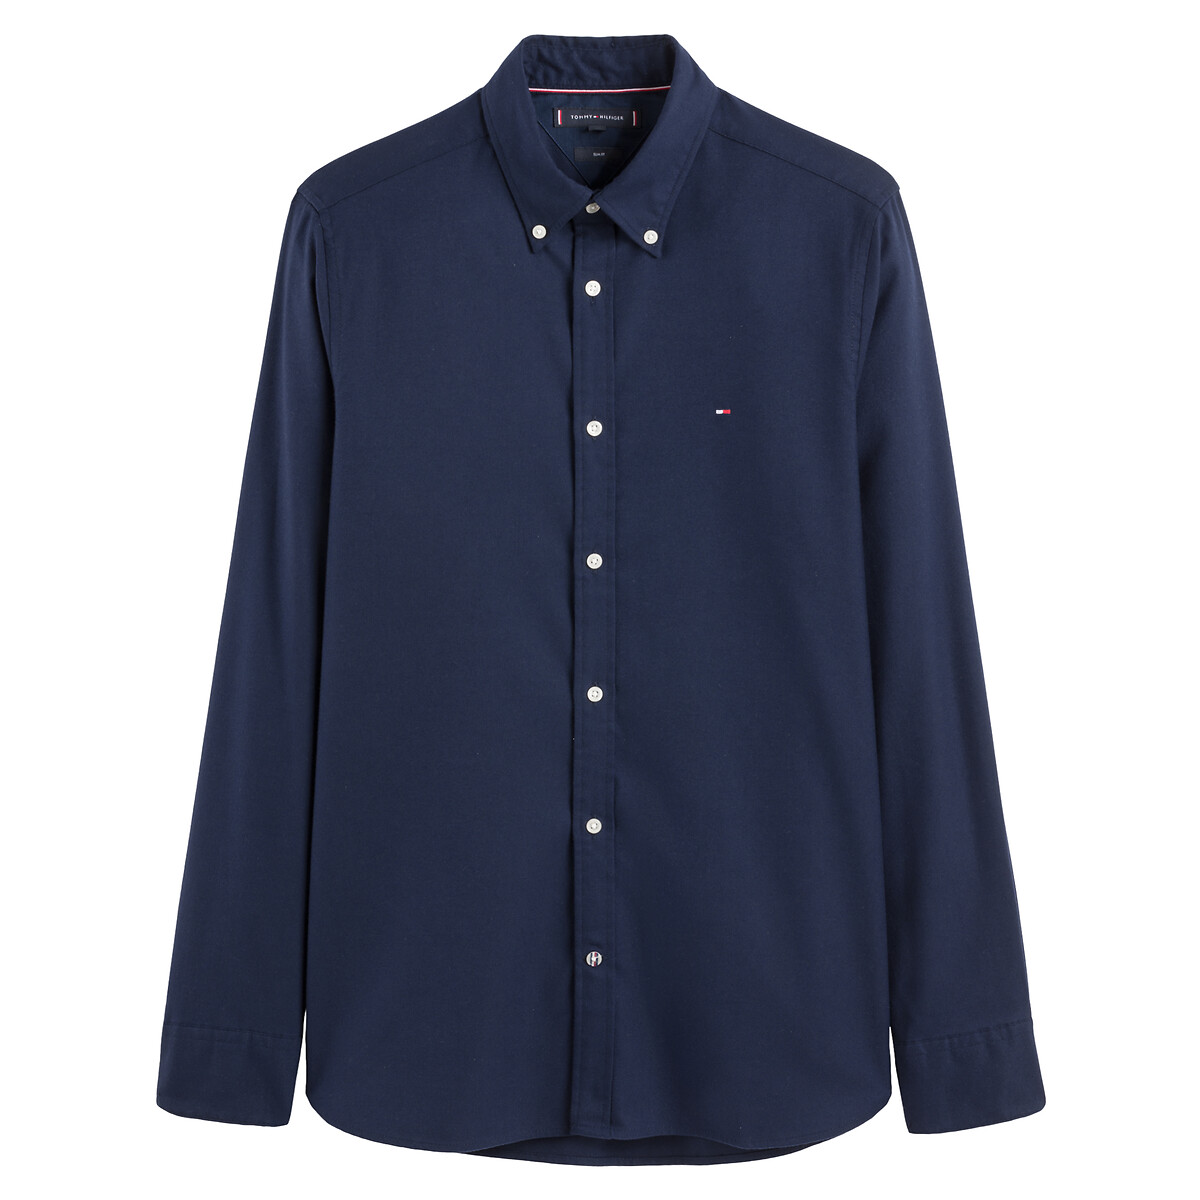 Embroidered Logo Oxford Shirt in Soft Touch Cotton Mix